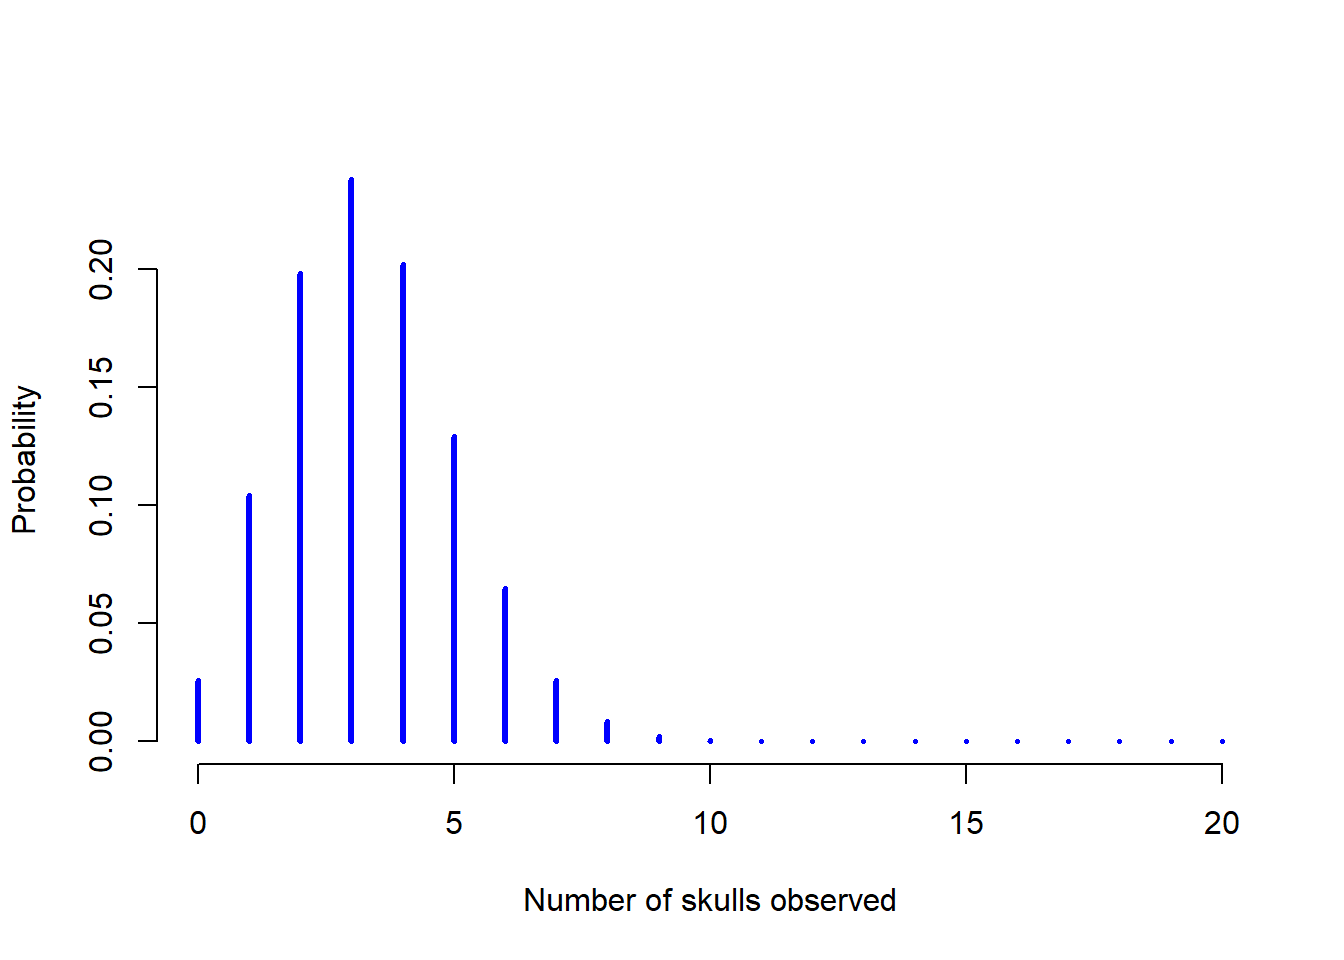 The binomial distribution with size parameter of $N=20$ and an underlying success probability of $theta = 1/6$. Each vertical bar depicts the probability of one specific outcome (i.e., one possible value of $X$). Because this is a probability distribution, each of the probabilities must be a number between 0 and 1, and the heights of the bars must sum to 1 as well.